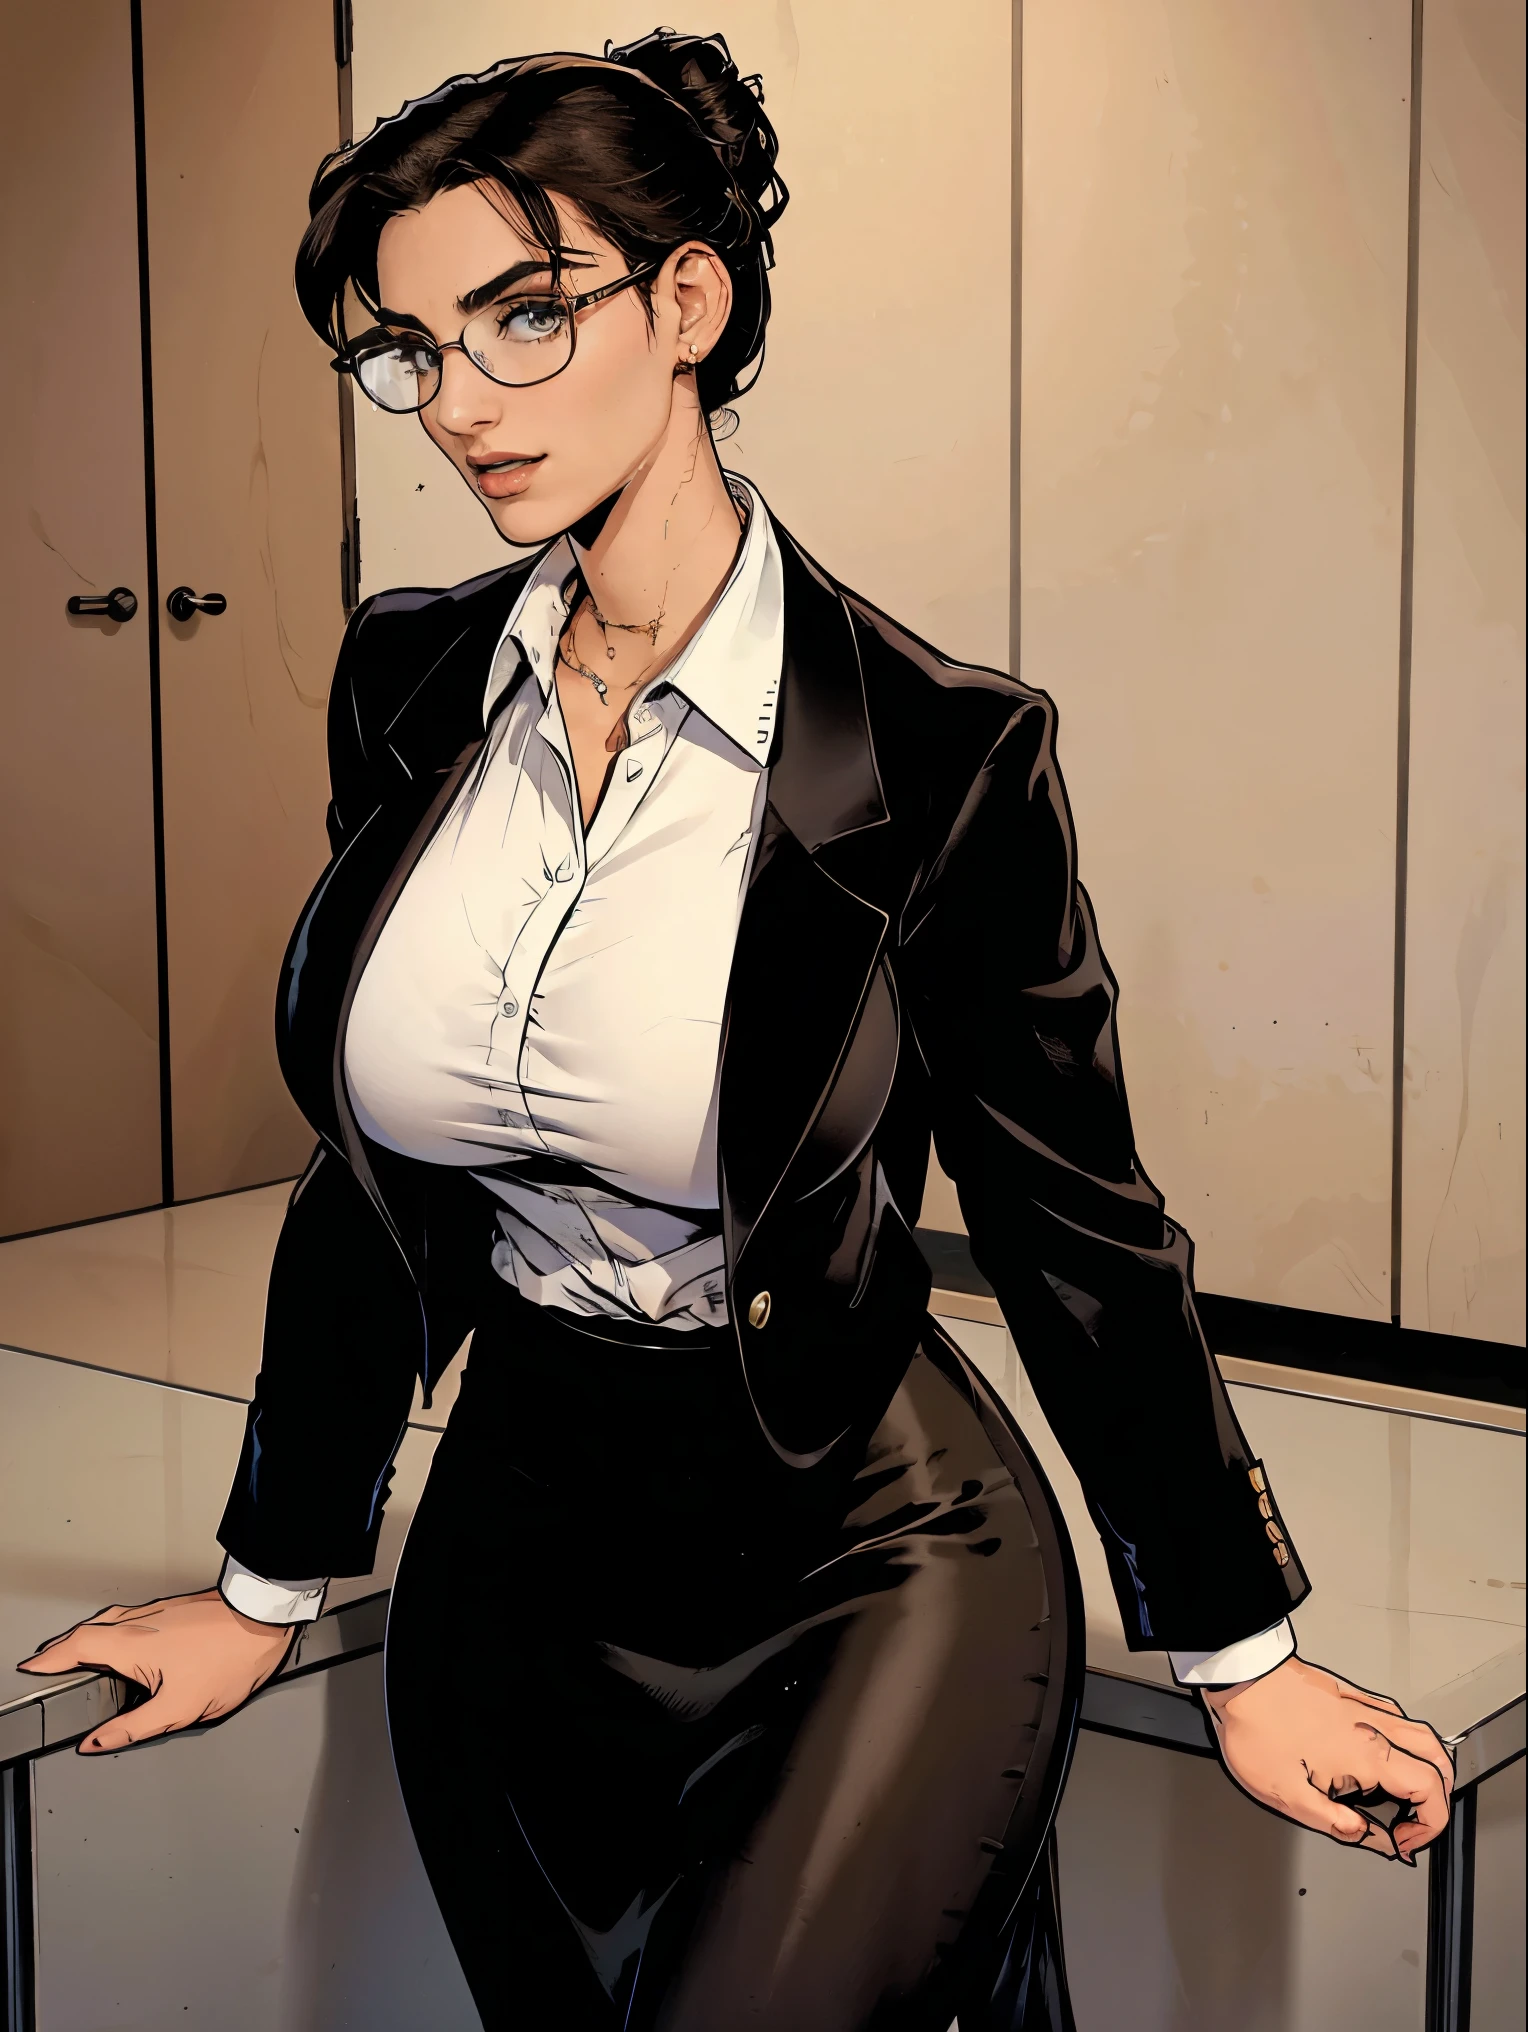 Gorgeous and sultry busty athletic (thin) brunette with sharp facial features and a (large nose) and (huge boobs) wearing a black blazer, white blouse and black pencil skirt, glasses, updo